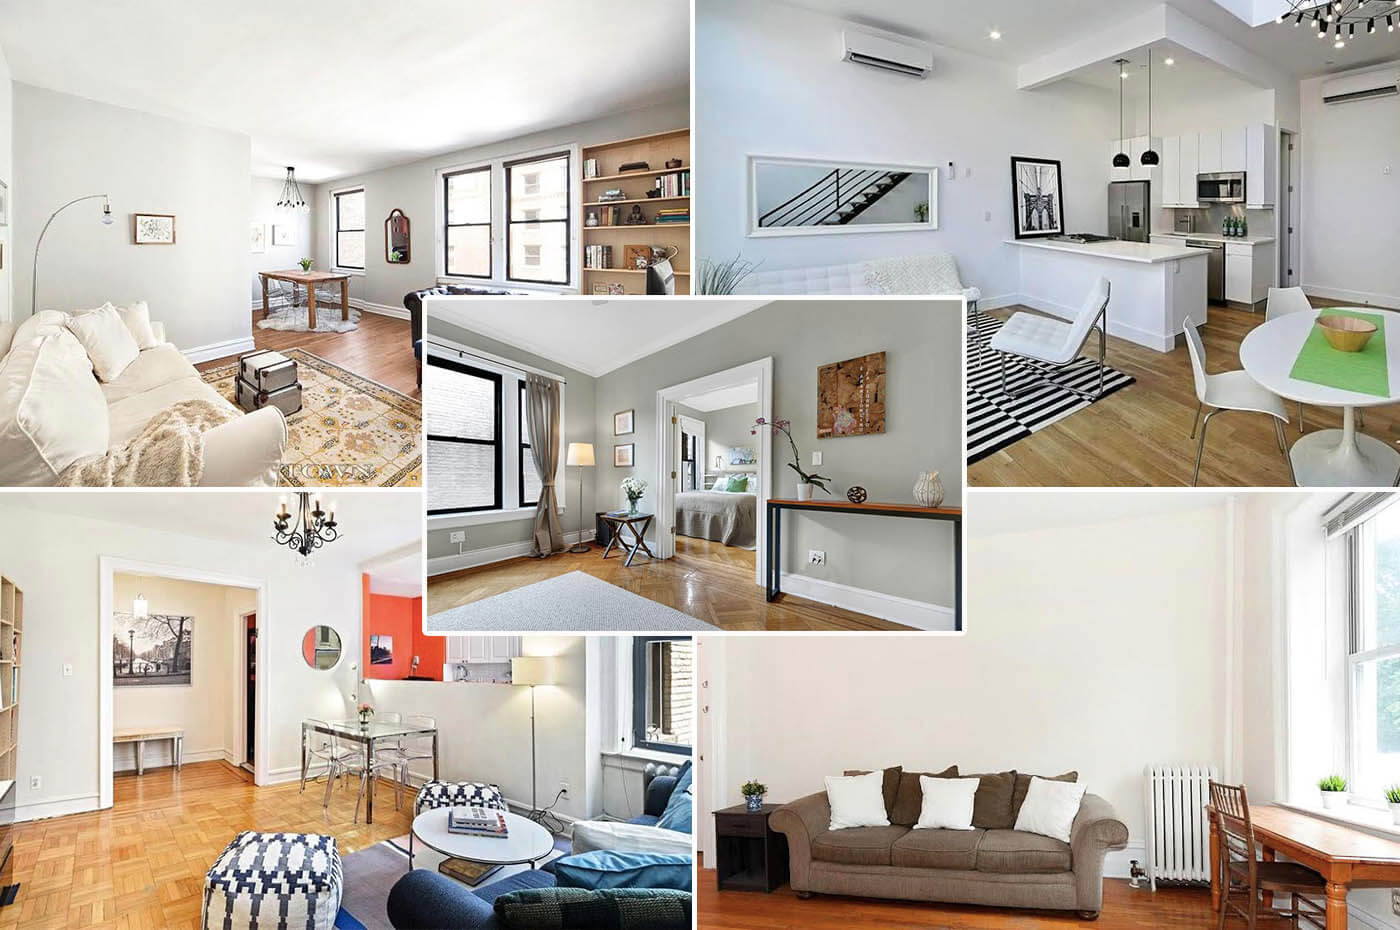 Brooklyn Homes for Sale